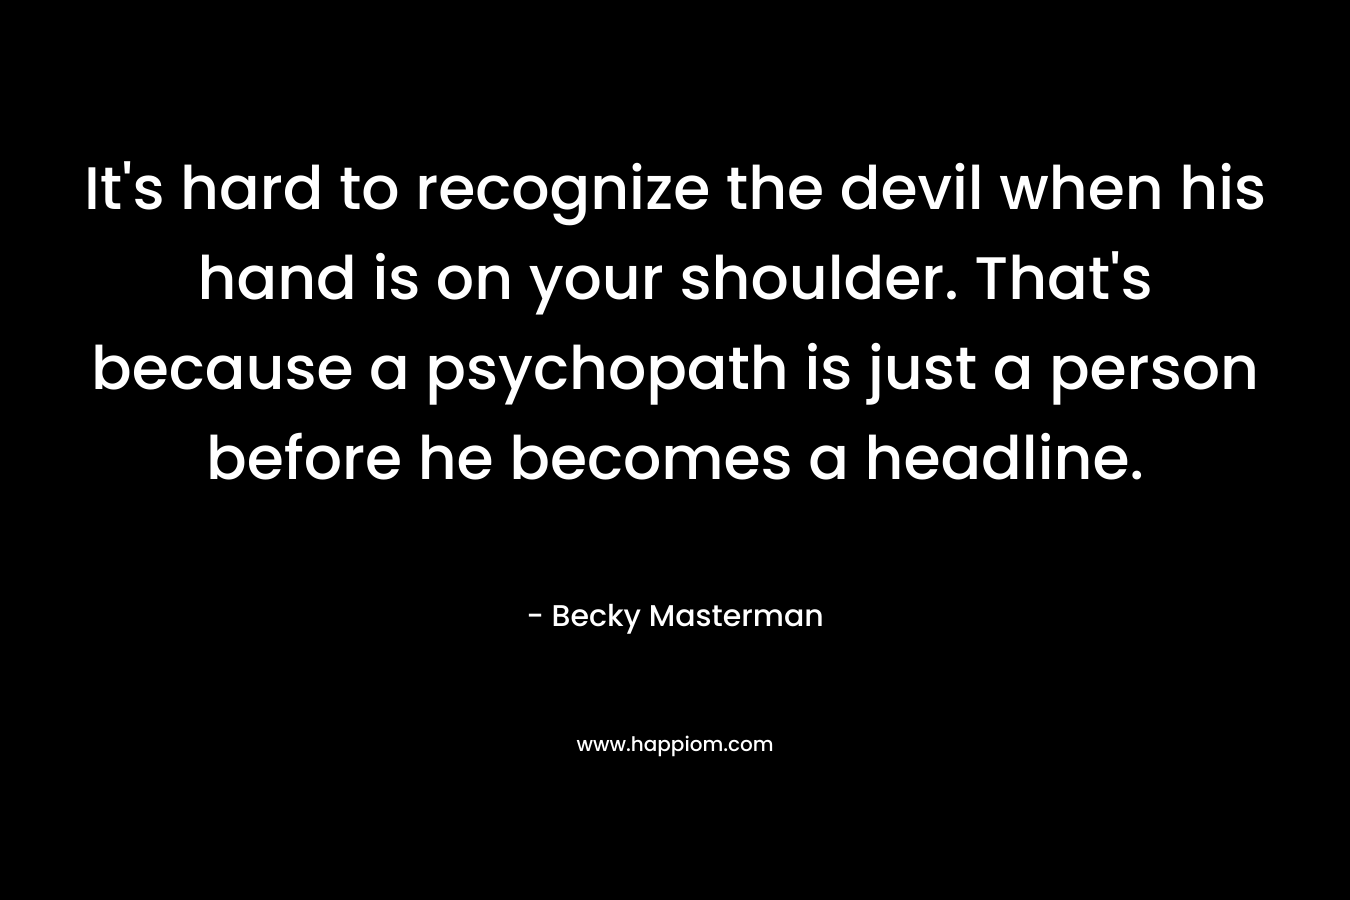 It's hard to recognize the devil when his hand is on your shoulder. That's because a psychopath is just a person before he becomes a headline.